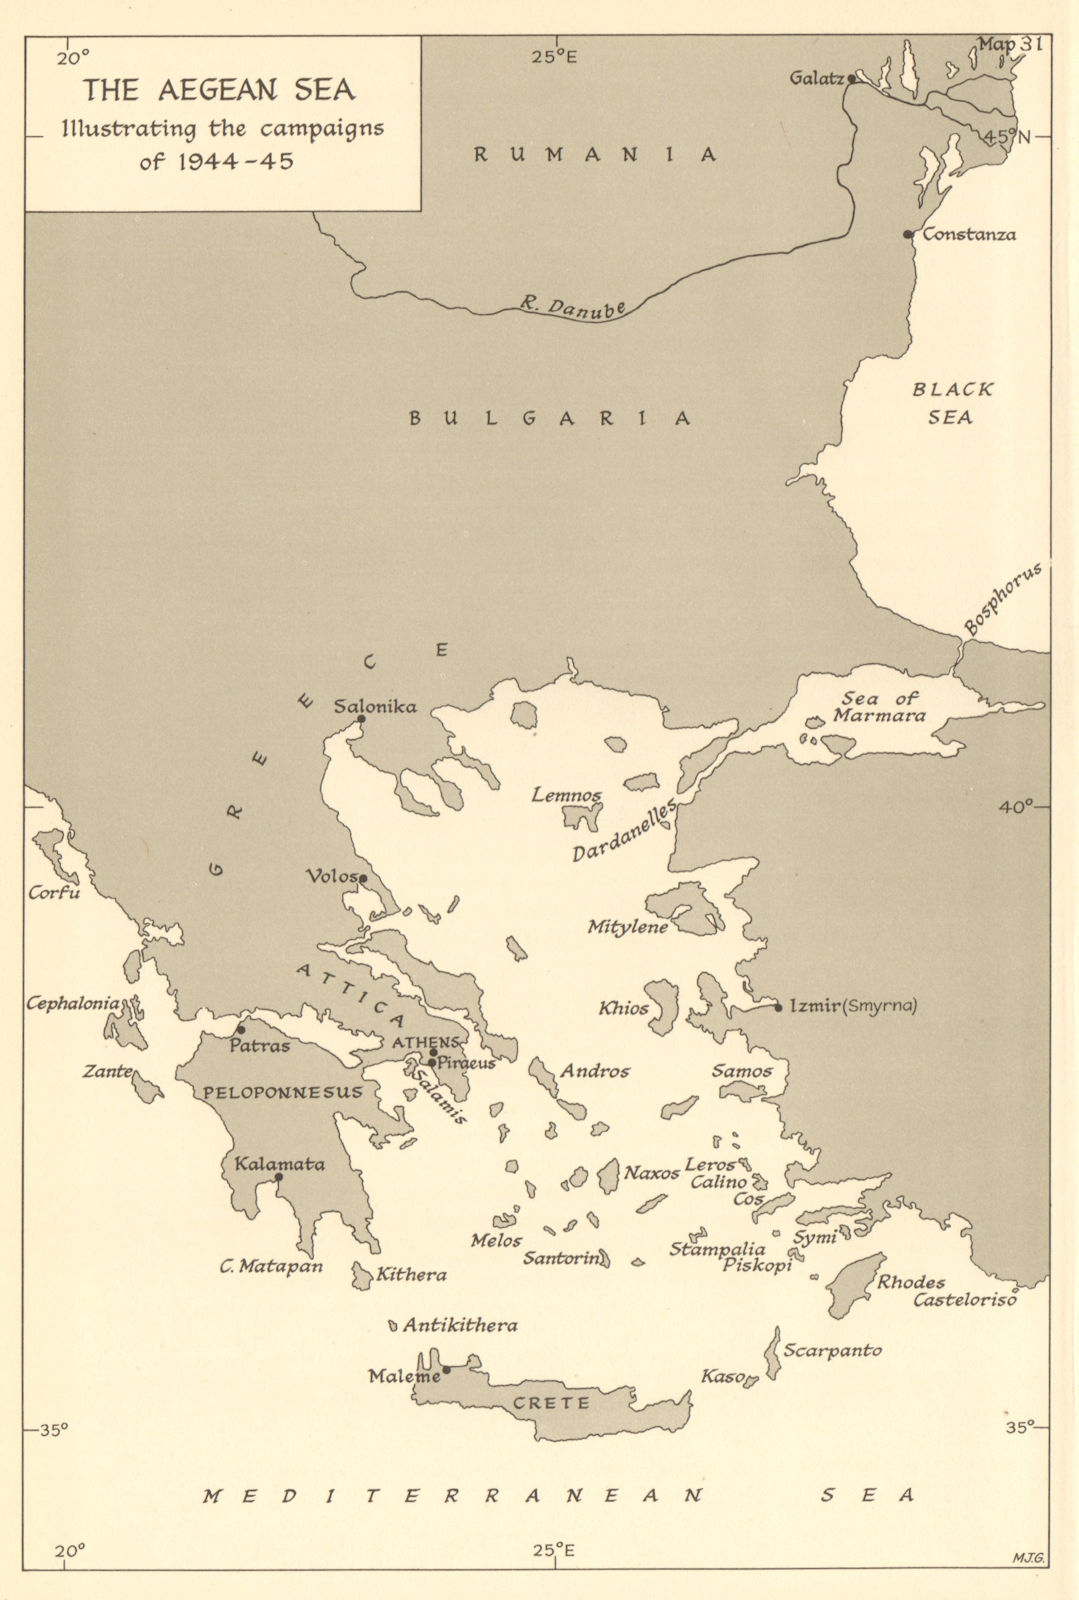 Aegean Sea illustrating the naval campaigns of 1944-45. World War 2 1961 map